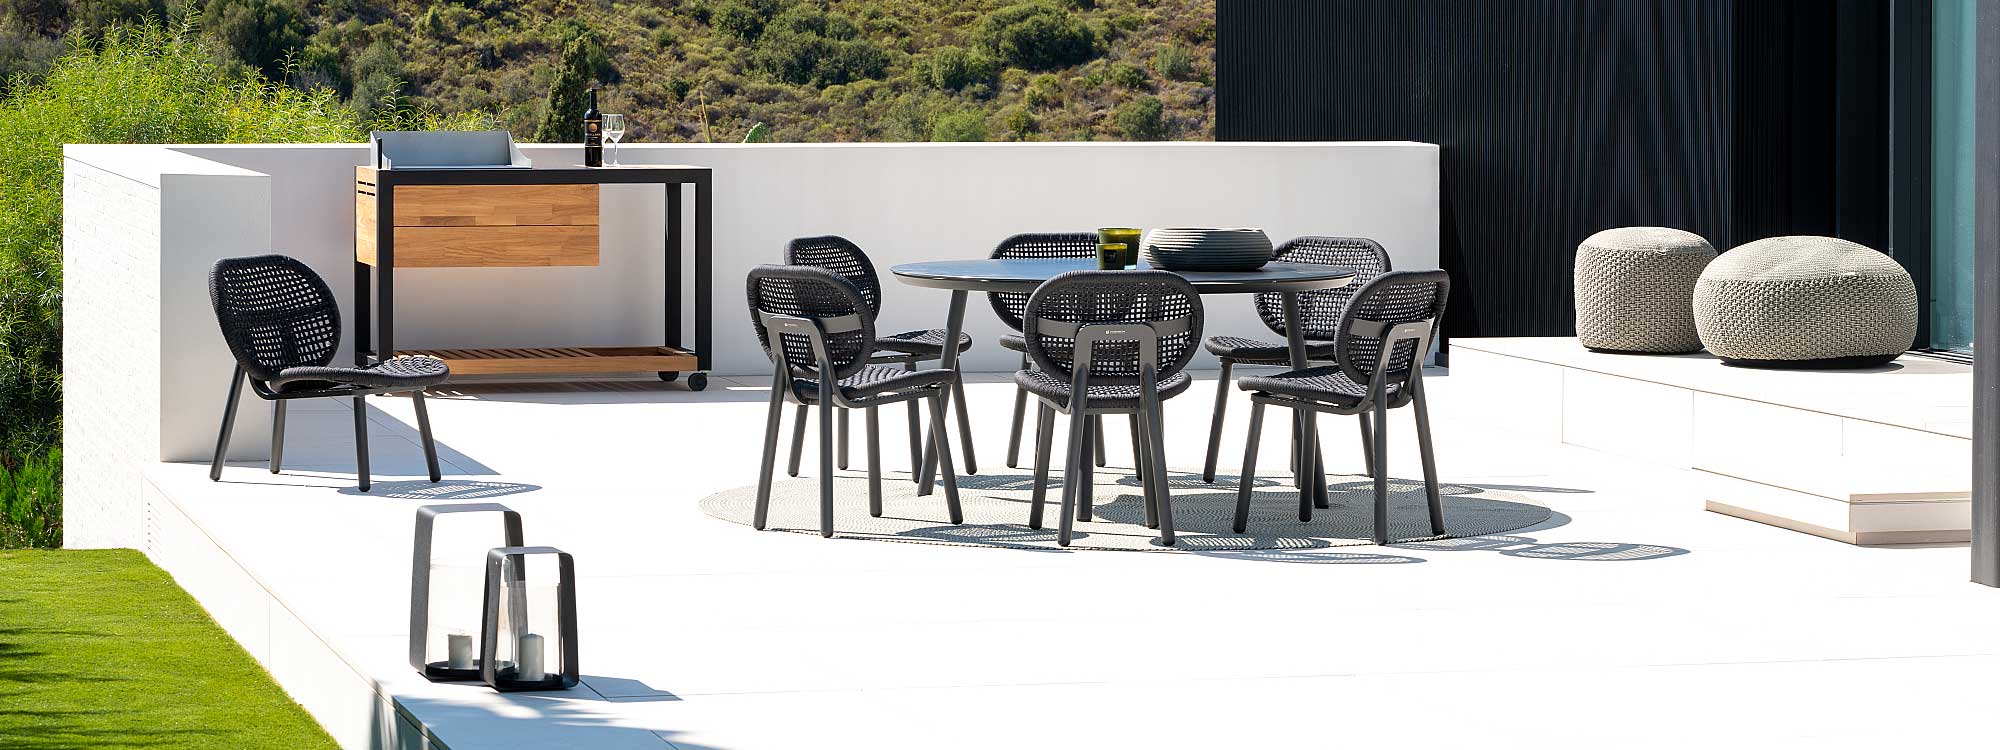 Image of Durham round garden table with Skate modern outdoor chairs in charcoal finish by Jati & Kebon